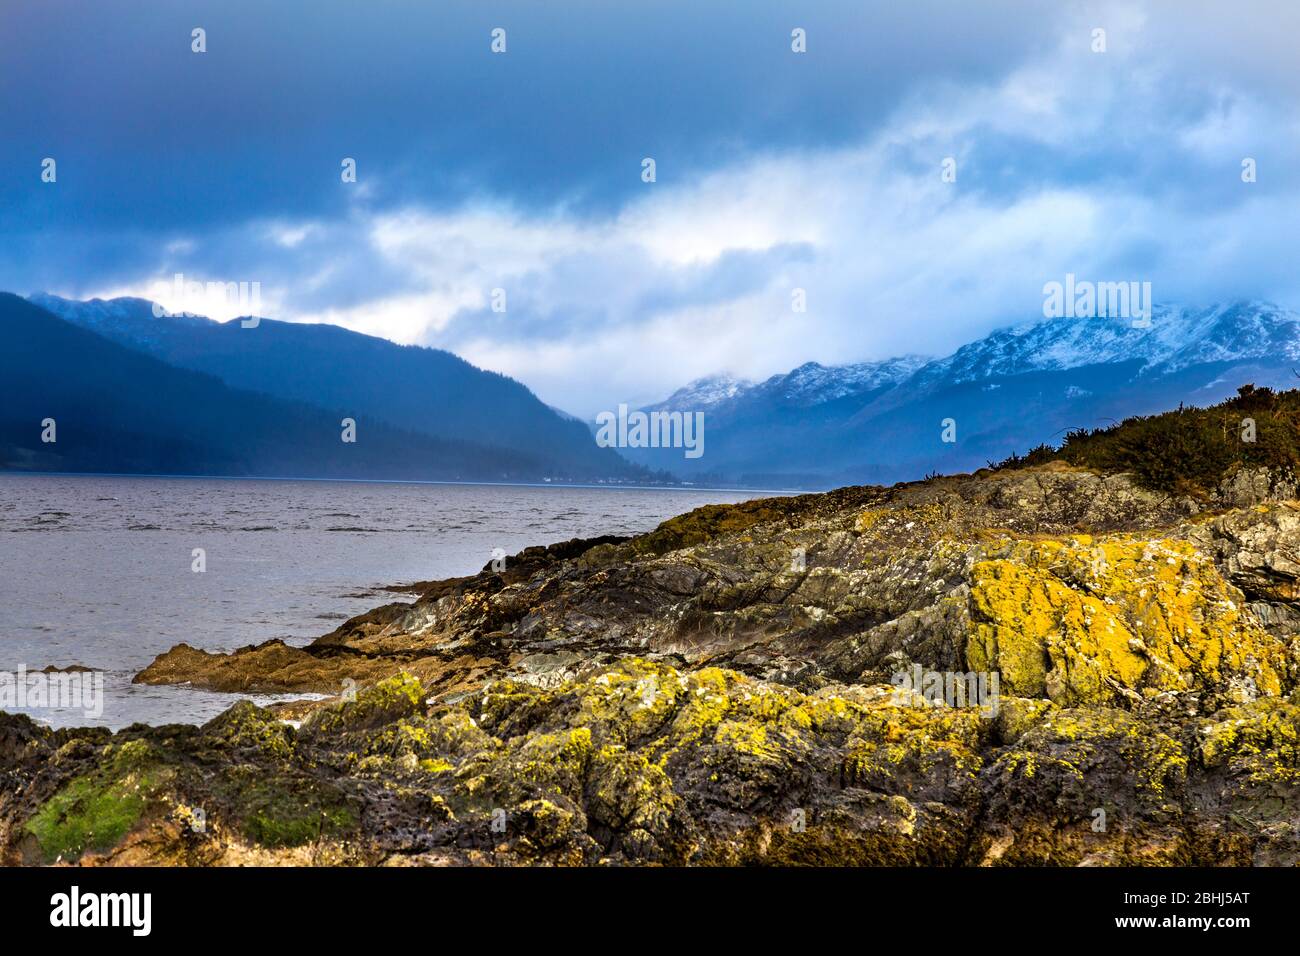 View of Loch Long and mountains shrouded in clouds, Scotland, UK Stock Photo